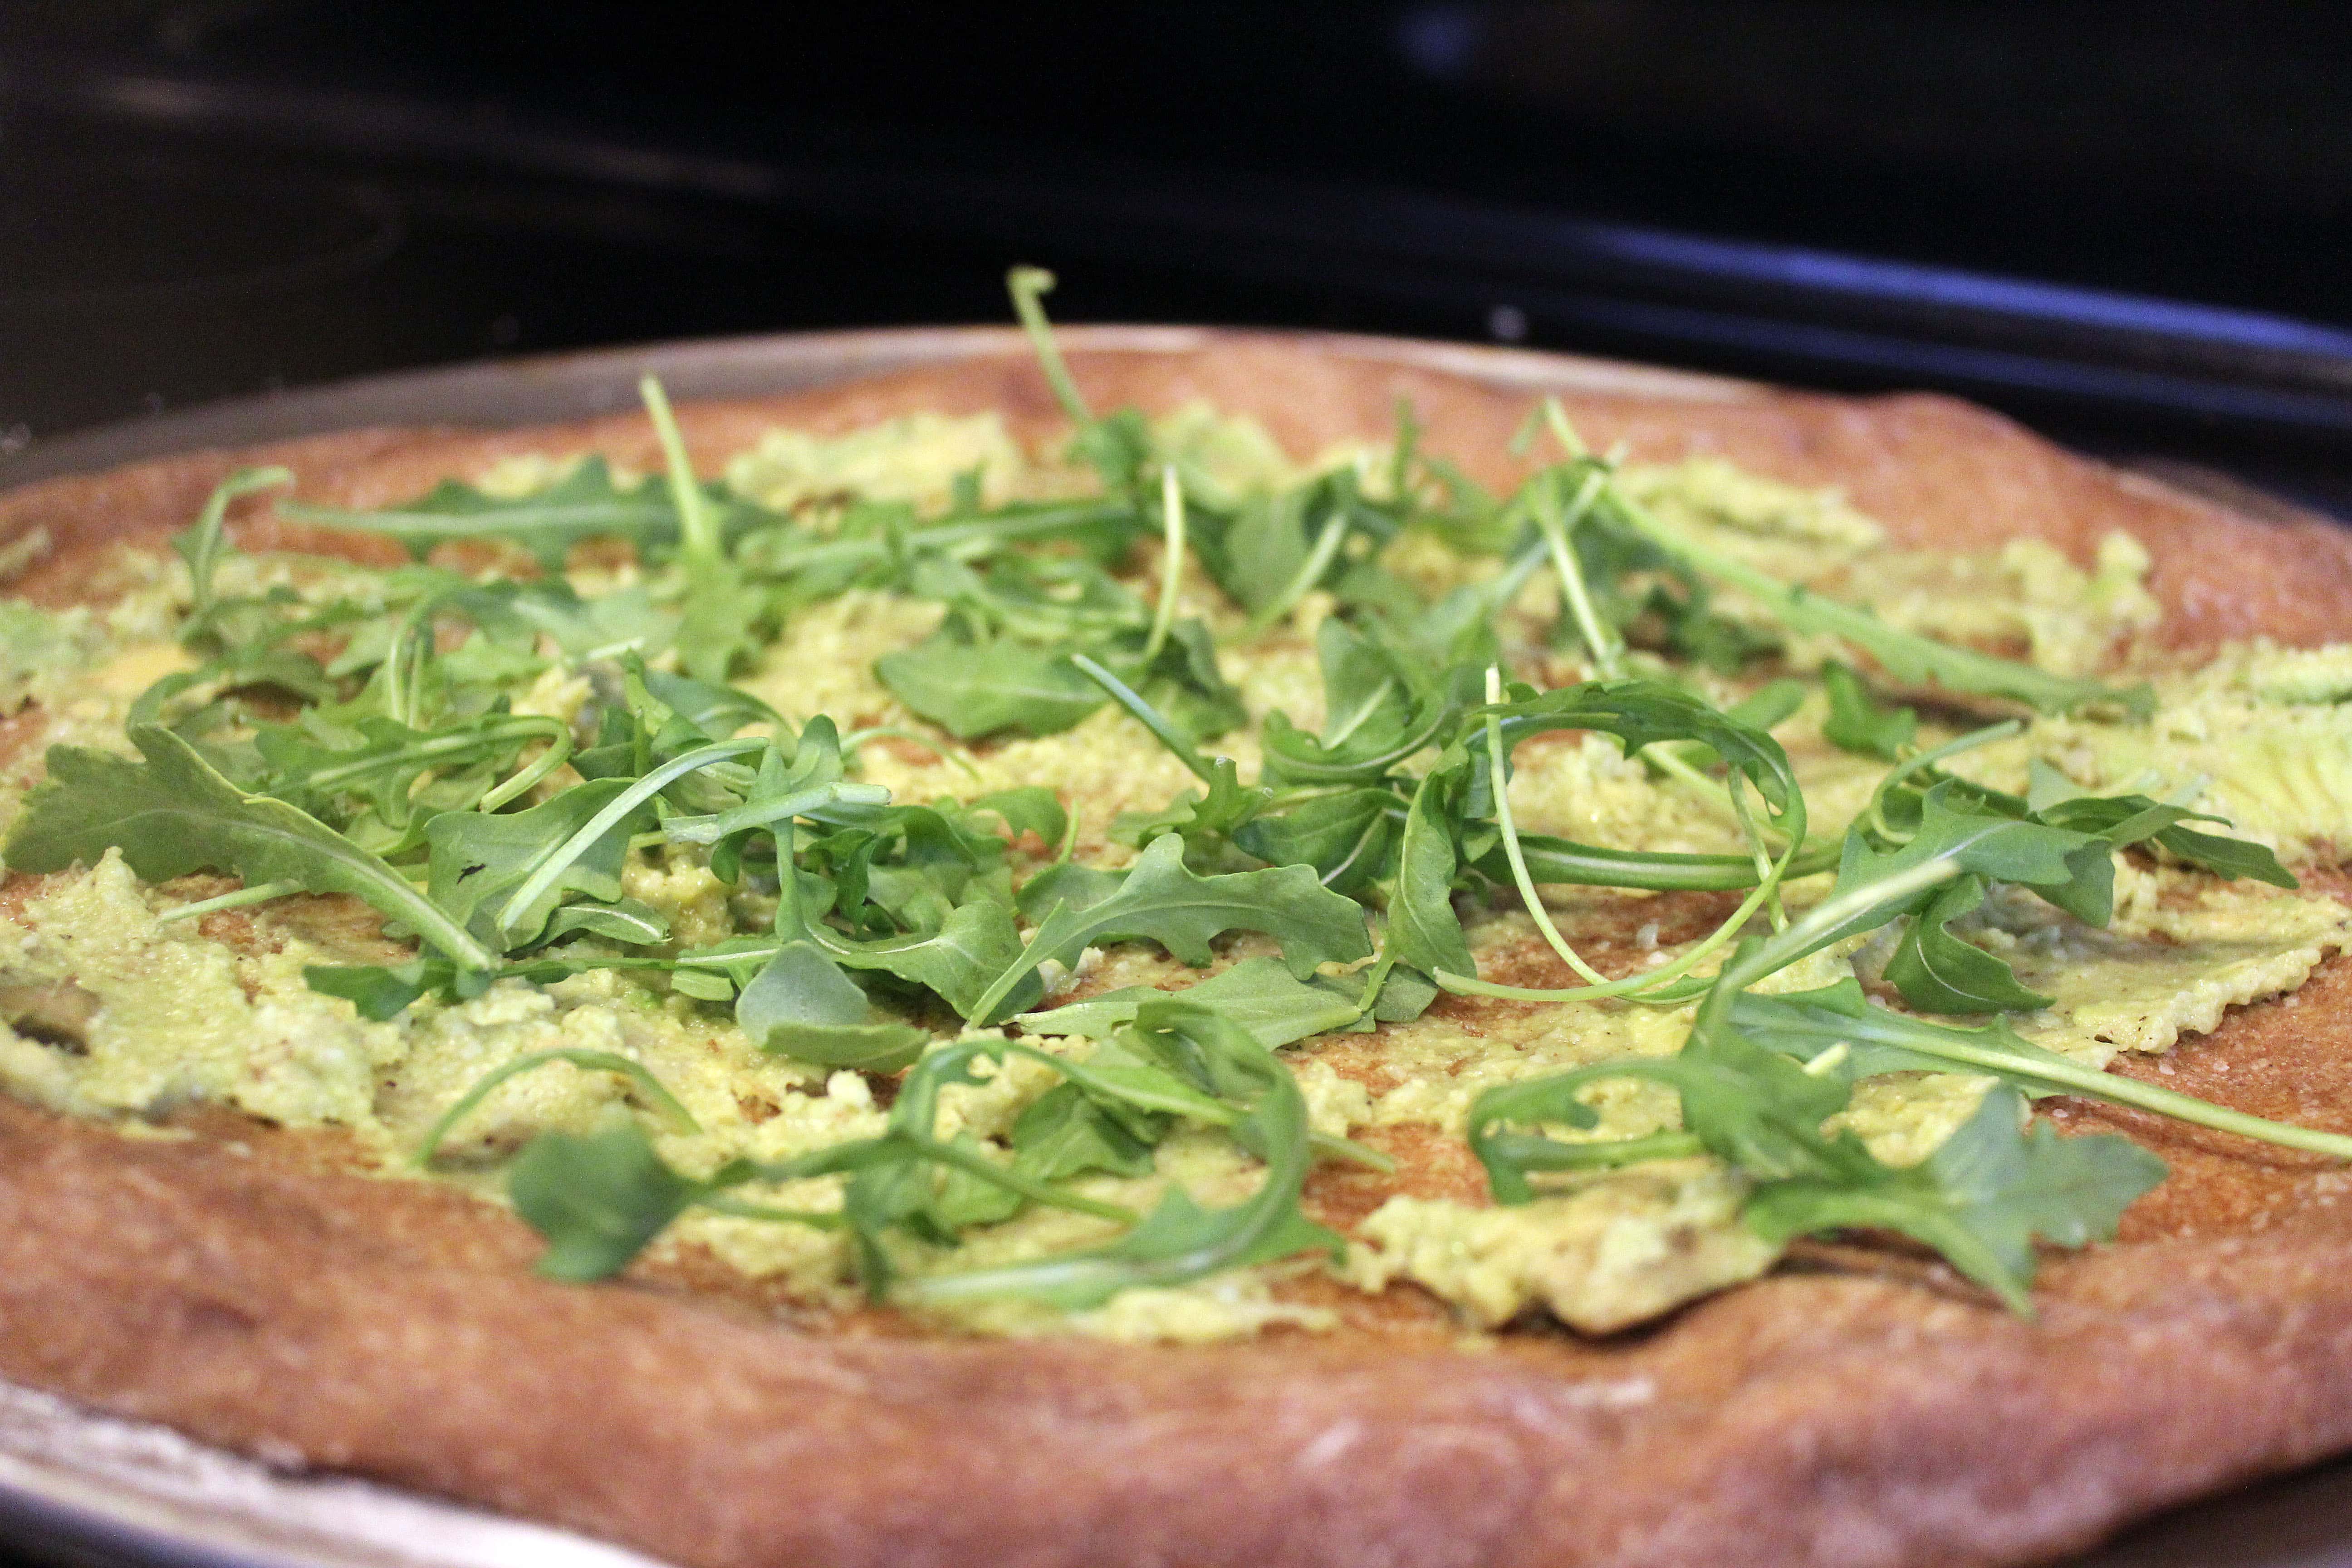 Spread sauce on pizza and top with arugula